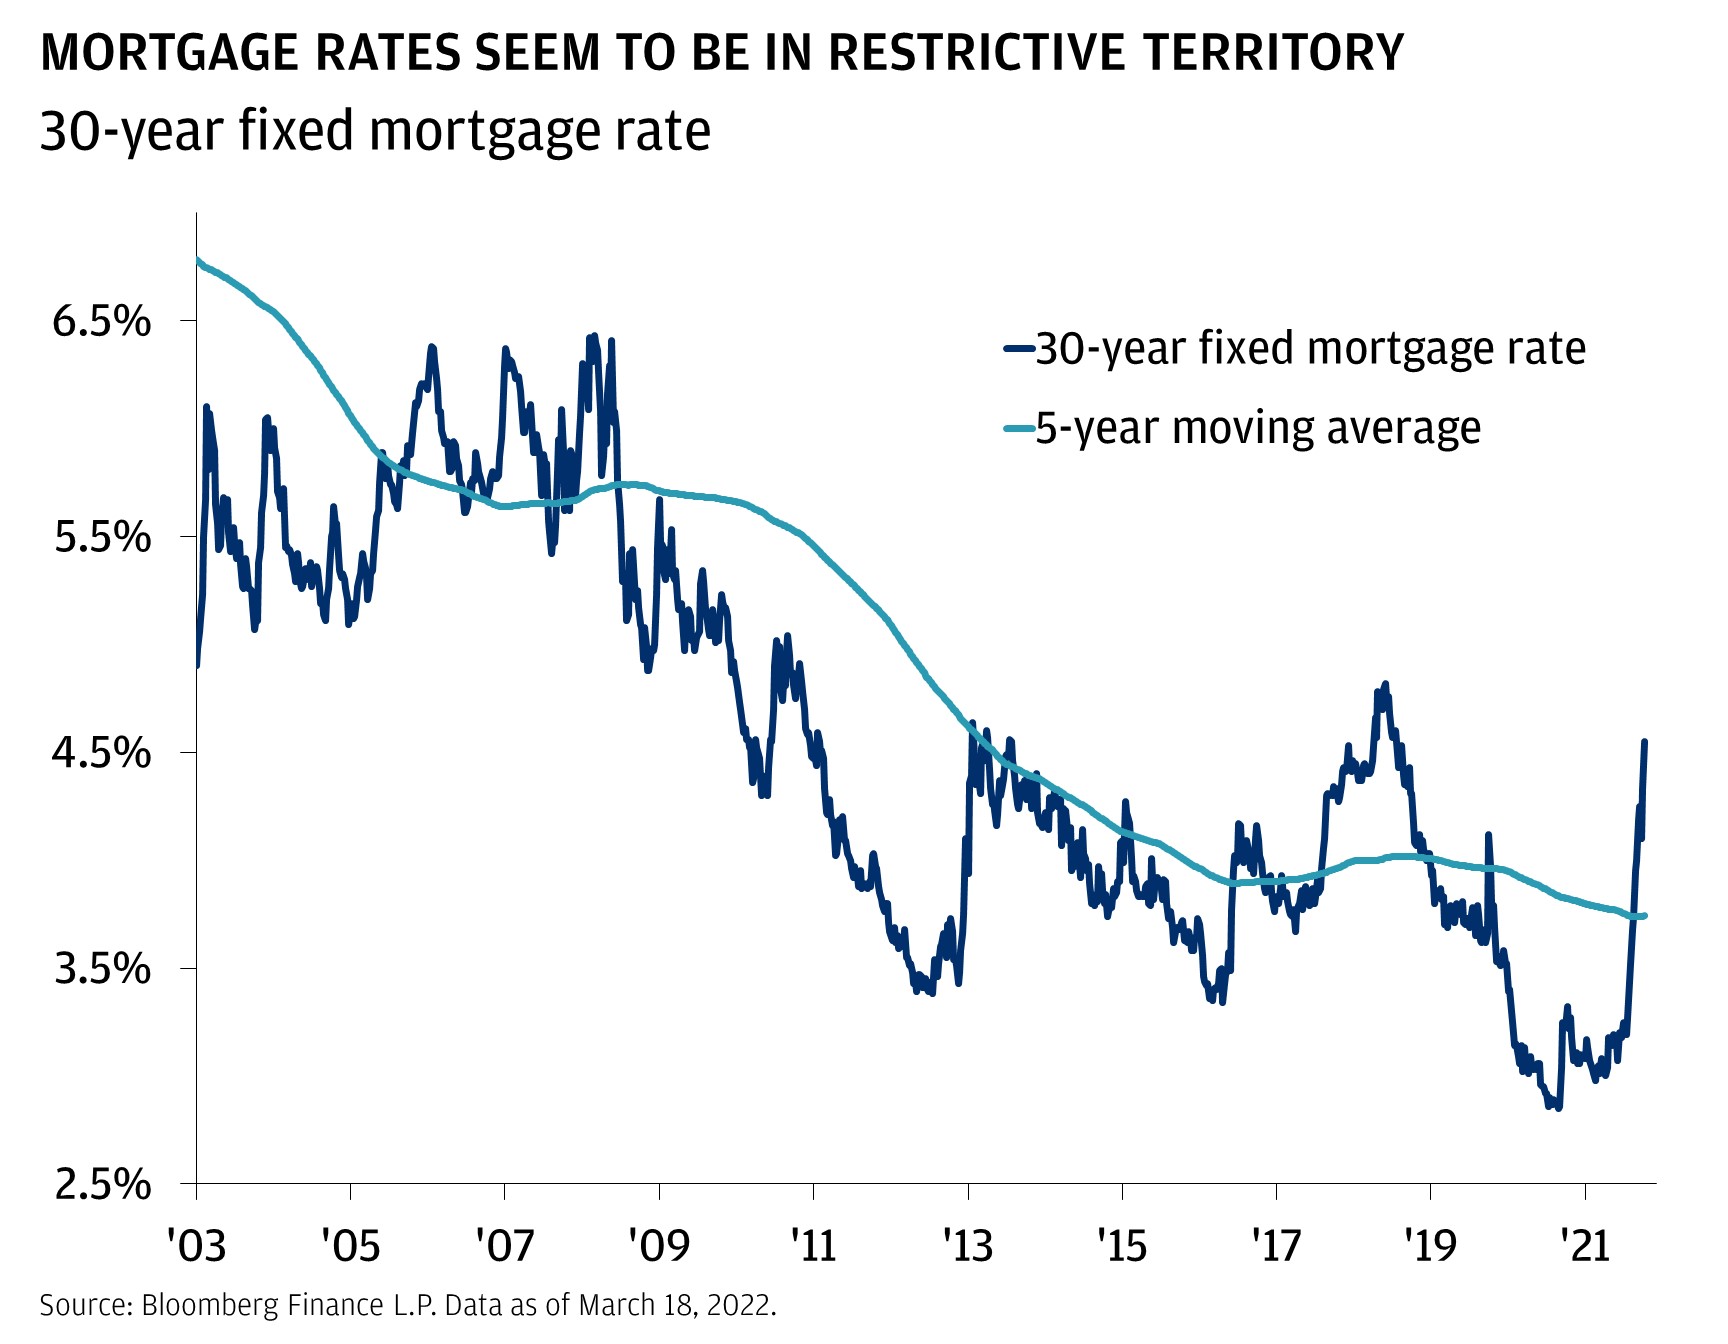 MORTGAGE RATES SEEM TO BE IN RESTRICTIVE TERRITORY. This chart shows the 30-year fixed mortgage rate and its 5-year moving average from June 13, 2003, to March 18, 2022.